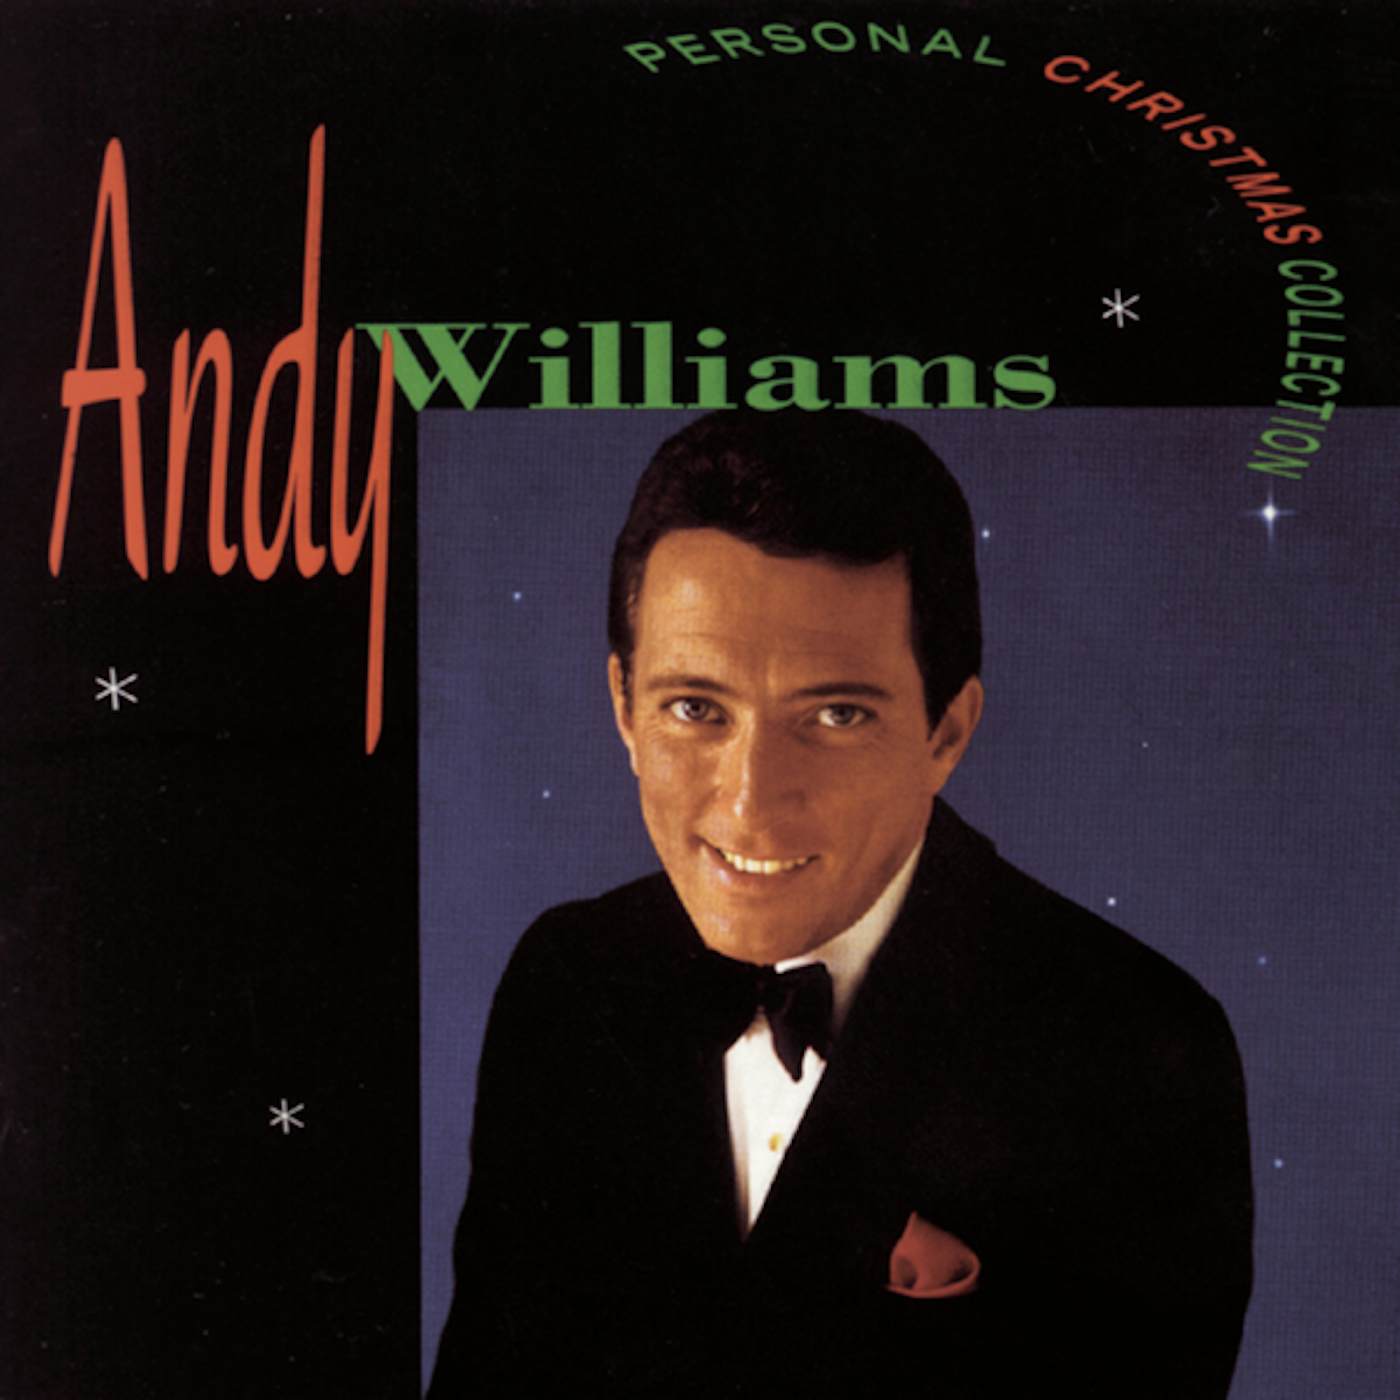 Andy Williams PERSONAL CHRISTMAS COLLECTION CD